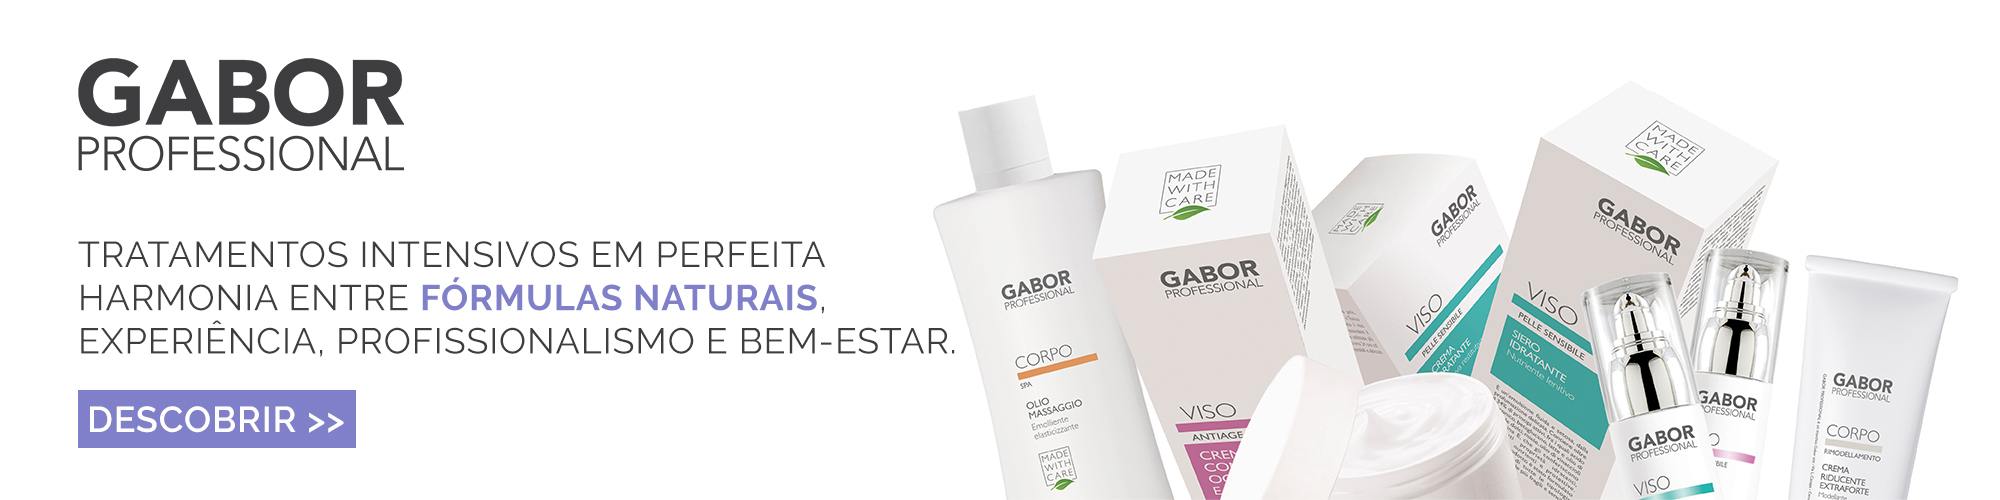 Gabor Professional Made With Care